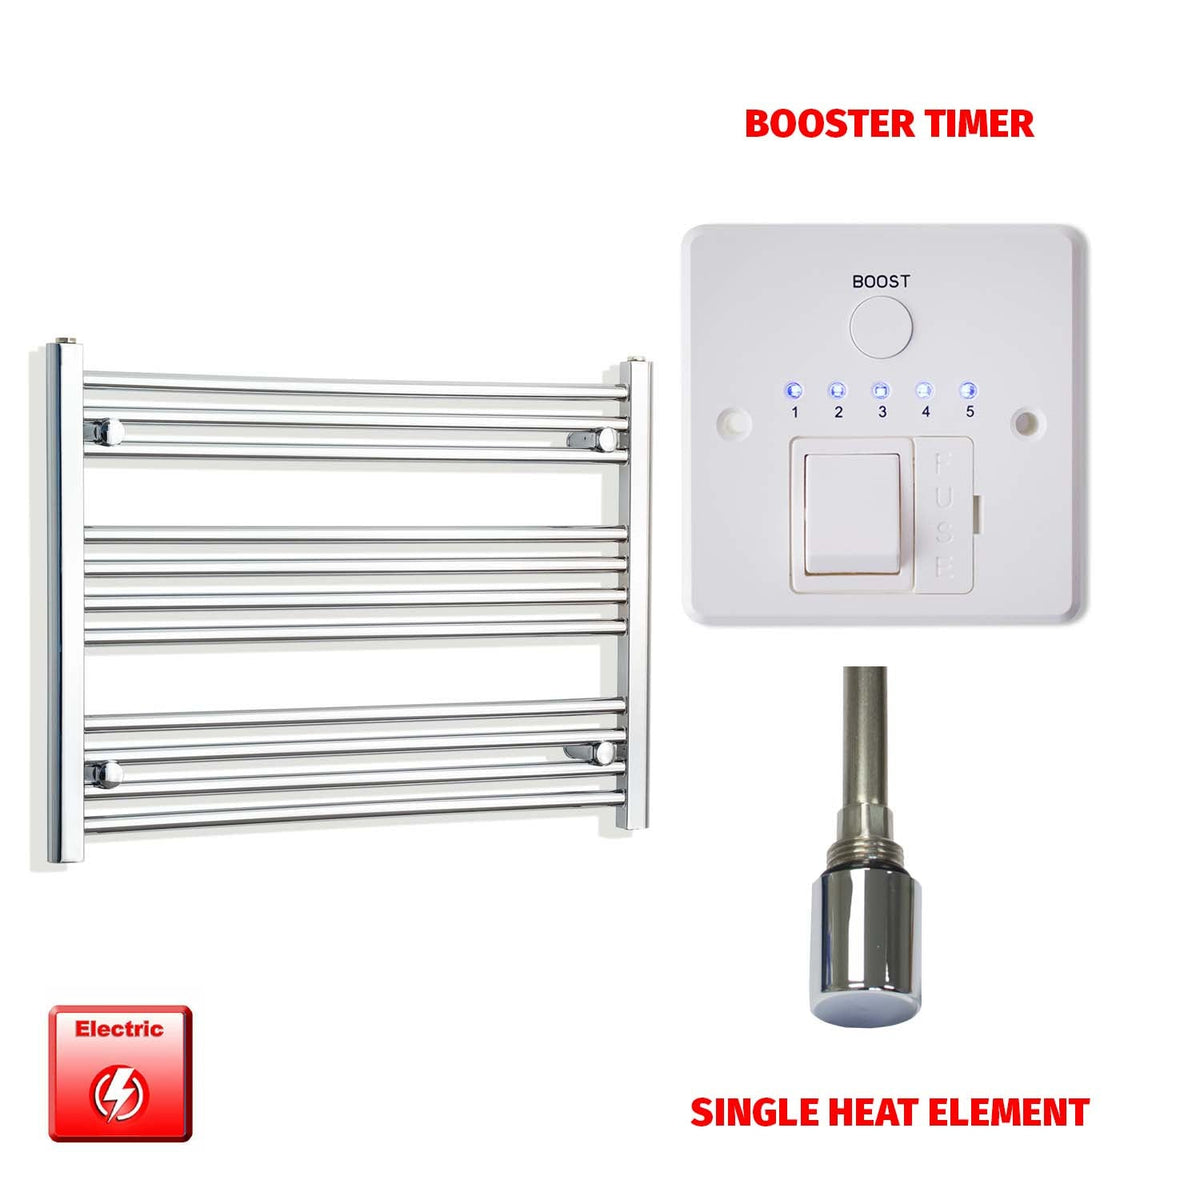 600mm High 850mm Wide Pre-Filled Electric Heated Towel Radiator Straight Chrome Single heat element Booster timer